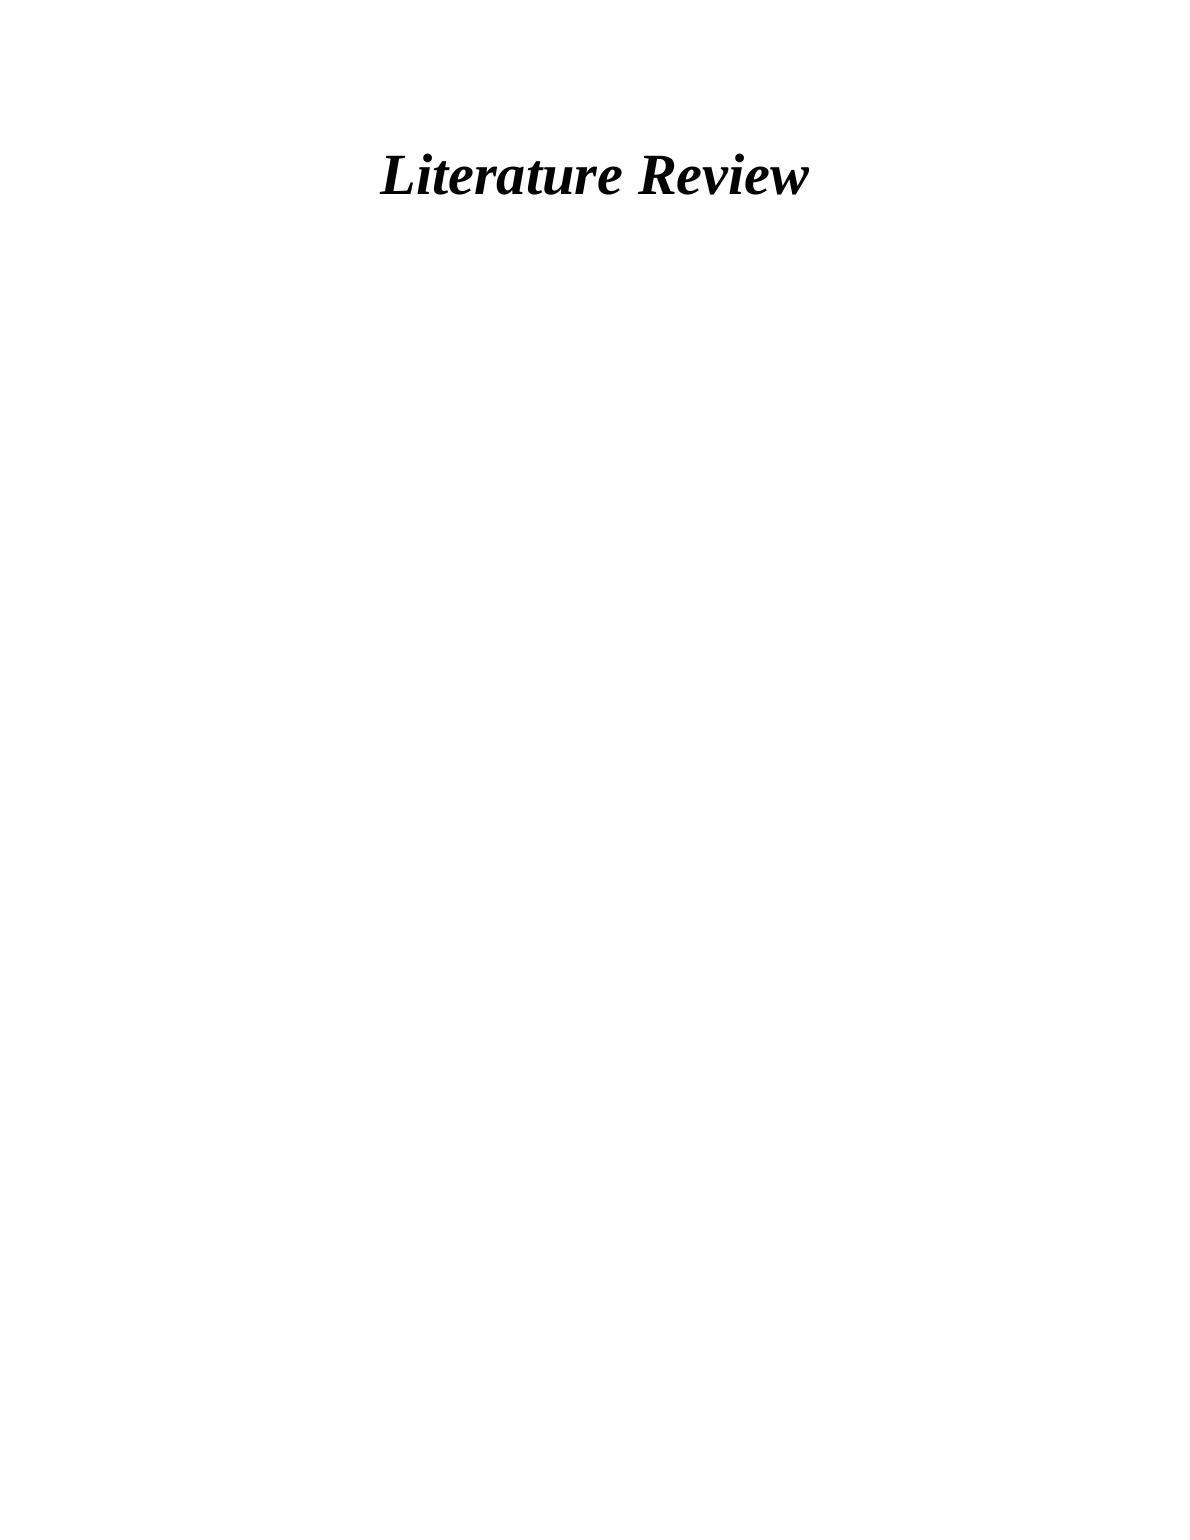 Literature Review Assignment - (Doc)_1